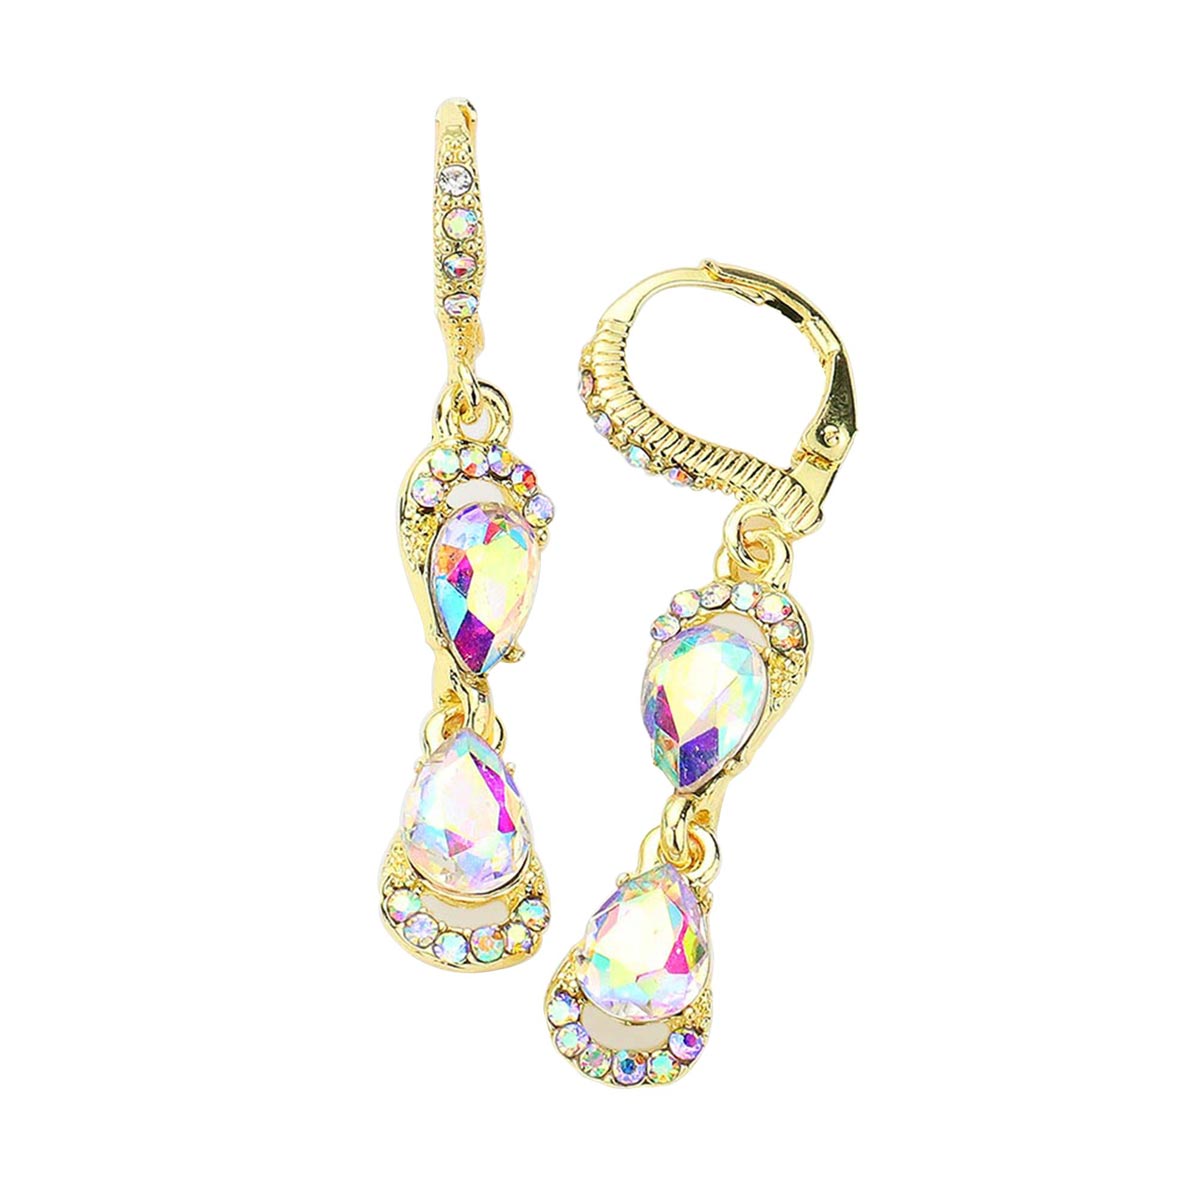 AB-Gold- Double Teardrop Stone Link Dangle Lever Back Evening Earrings, Wear a pop of shine to complete your ensemble with a classy style. The perfect accessory for adding just the right amount of shimmer and a touch of class to special events. Jewelry that fits your lifestyle and makes your moments awesome! They will dangle on your earlobes & bring a smile of joy to those who look at you.